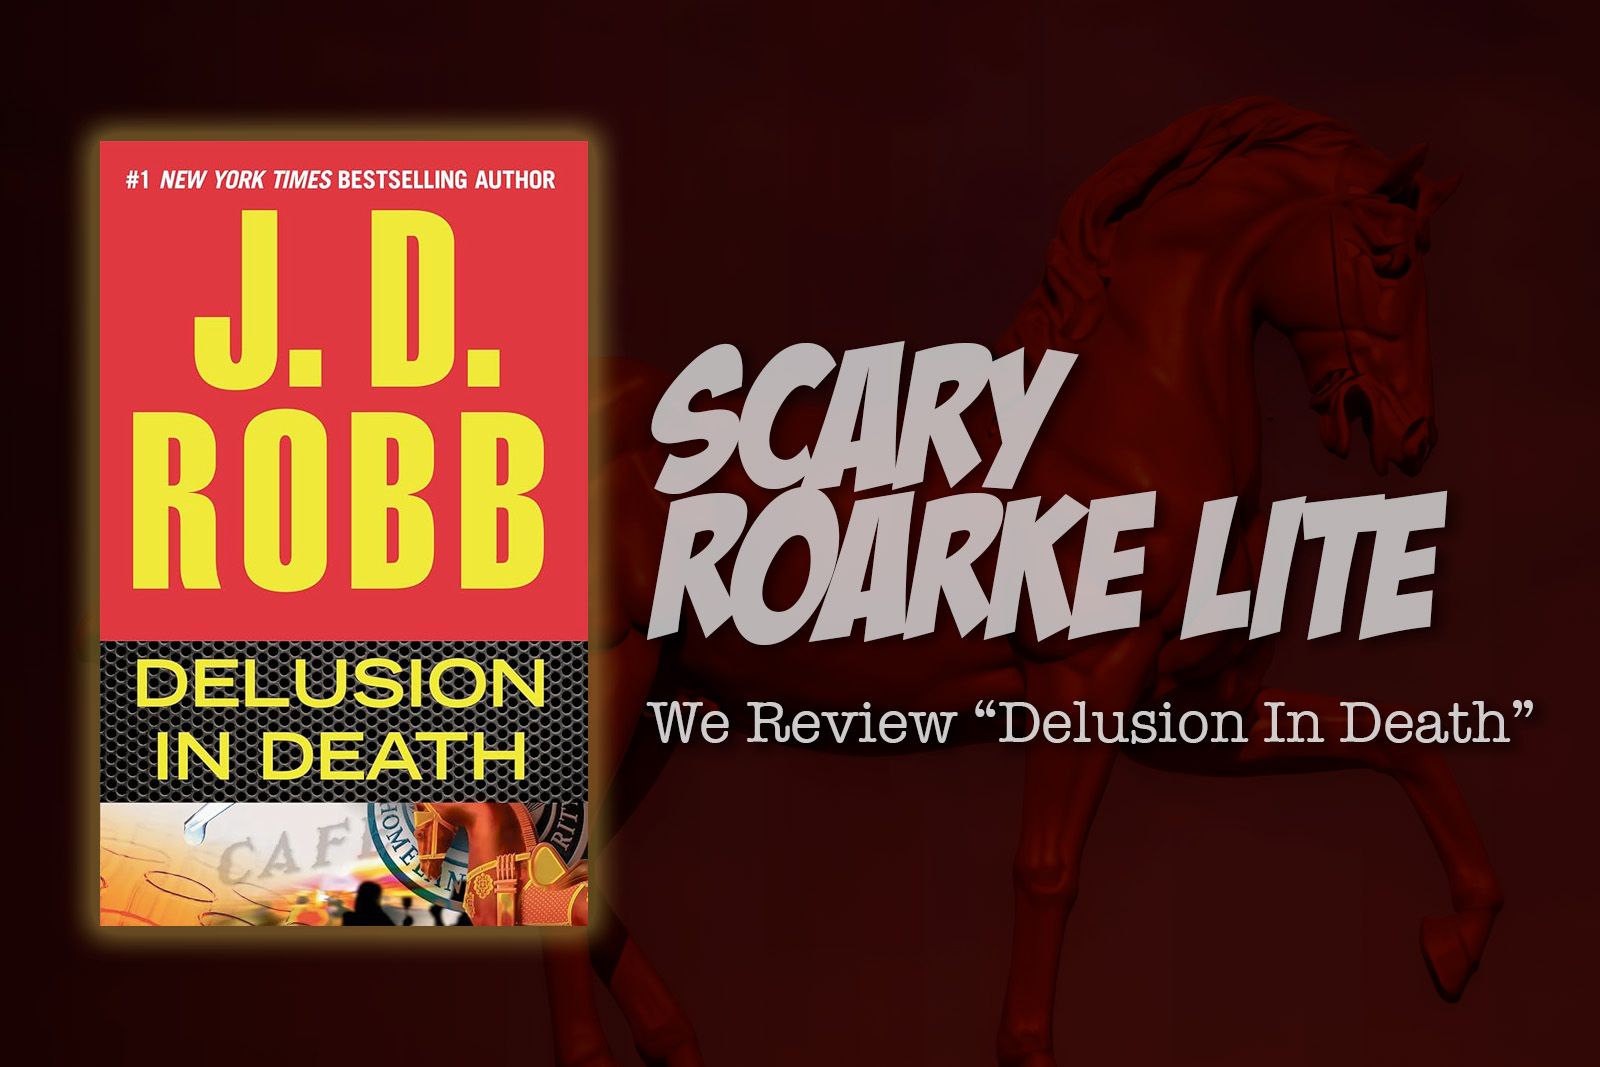 Scary Roarke Lite: We Review “Delusion in Death”